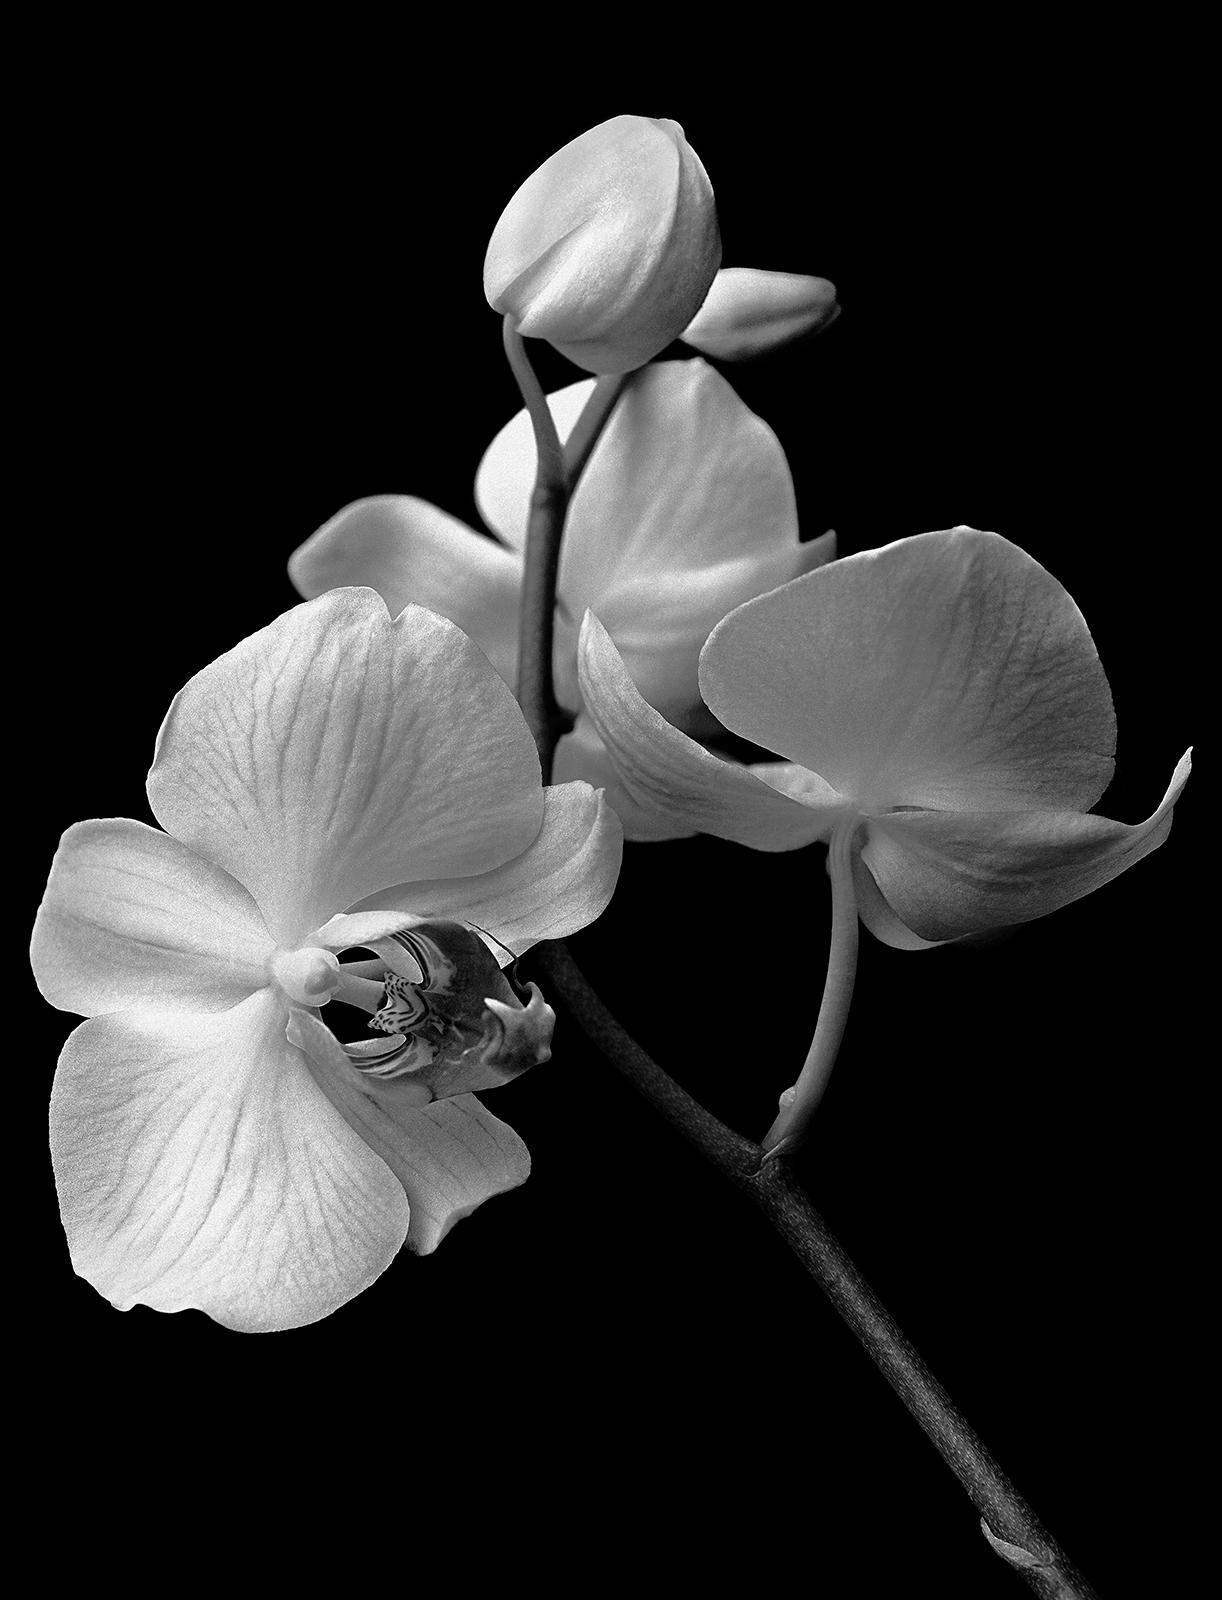 Ian Sanderson Black and White Photograph - Orchid -Signed limited edition still life print, Black nature photo, Oversize